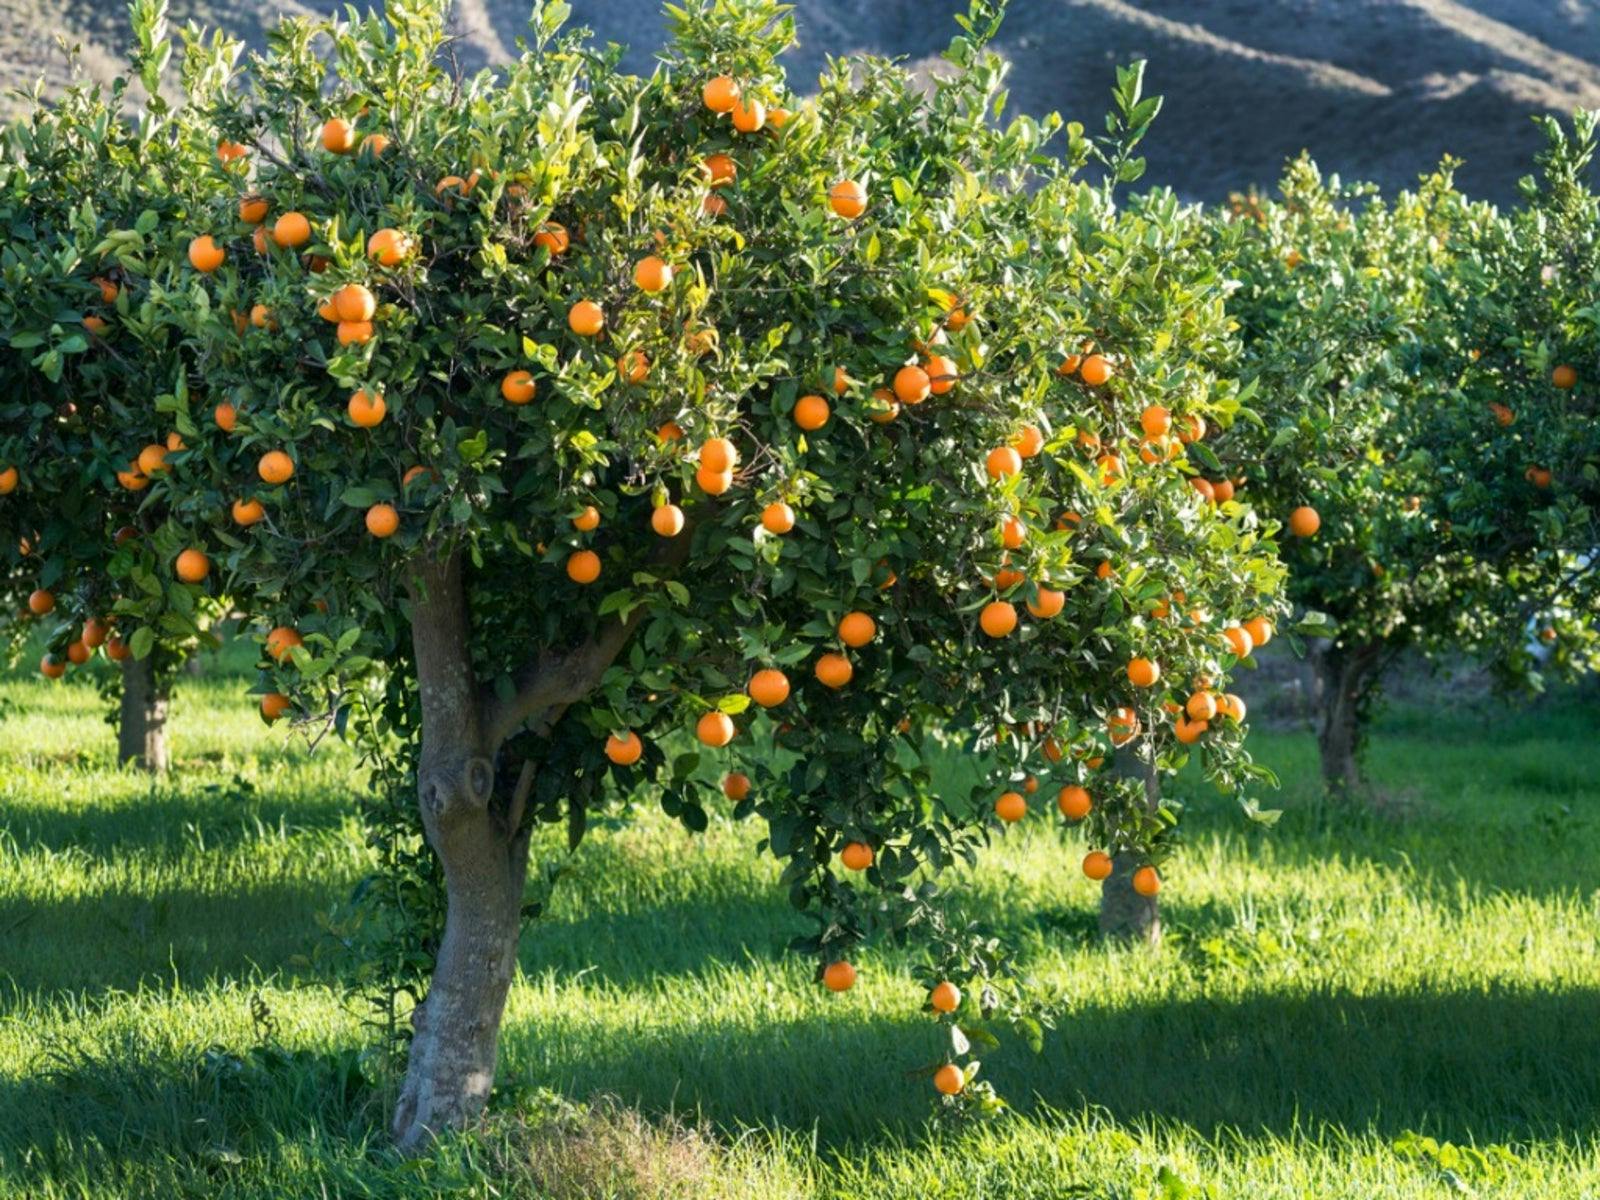 How does irrigation and nutrition affect citrus fruits production and quality